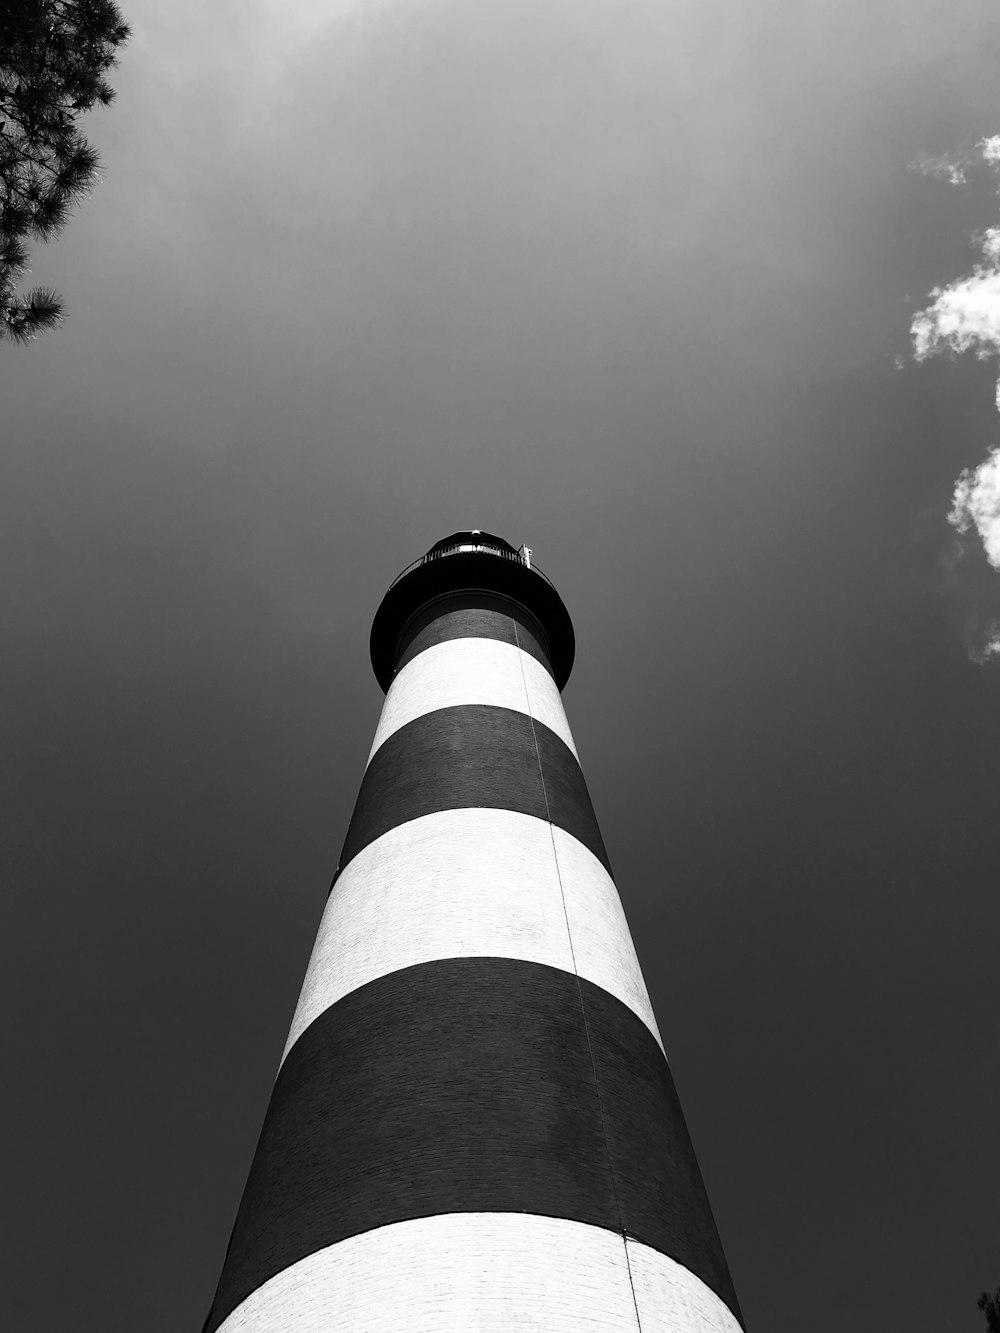 grayscale photo of a light house